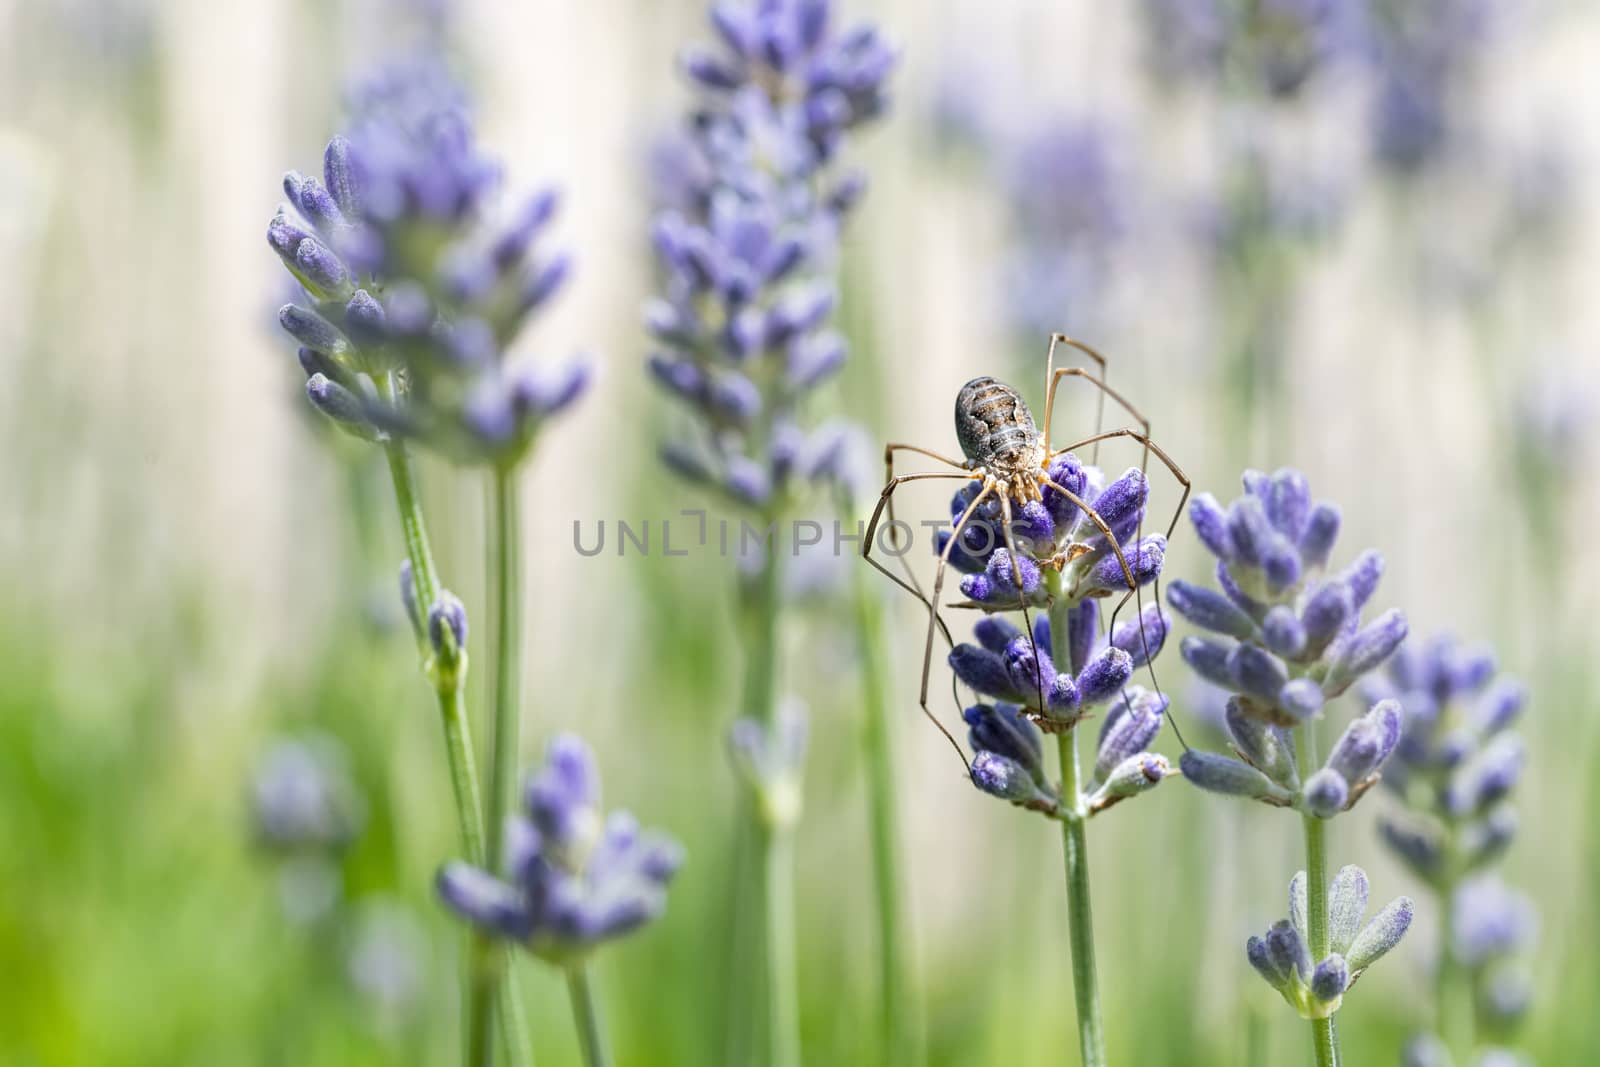 Huge spider laying on a purple lavender flower blossom waiting for insect to pass by to capture